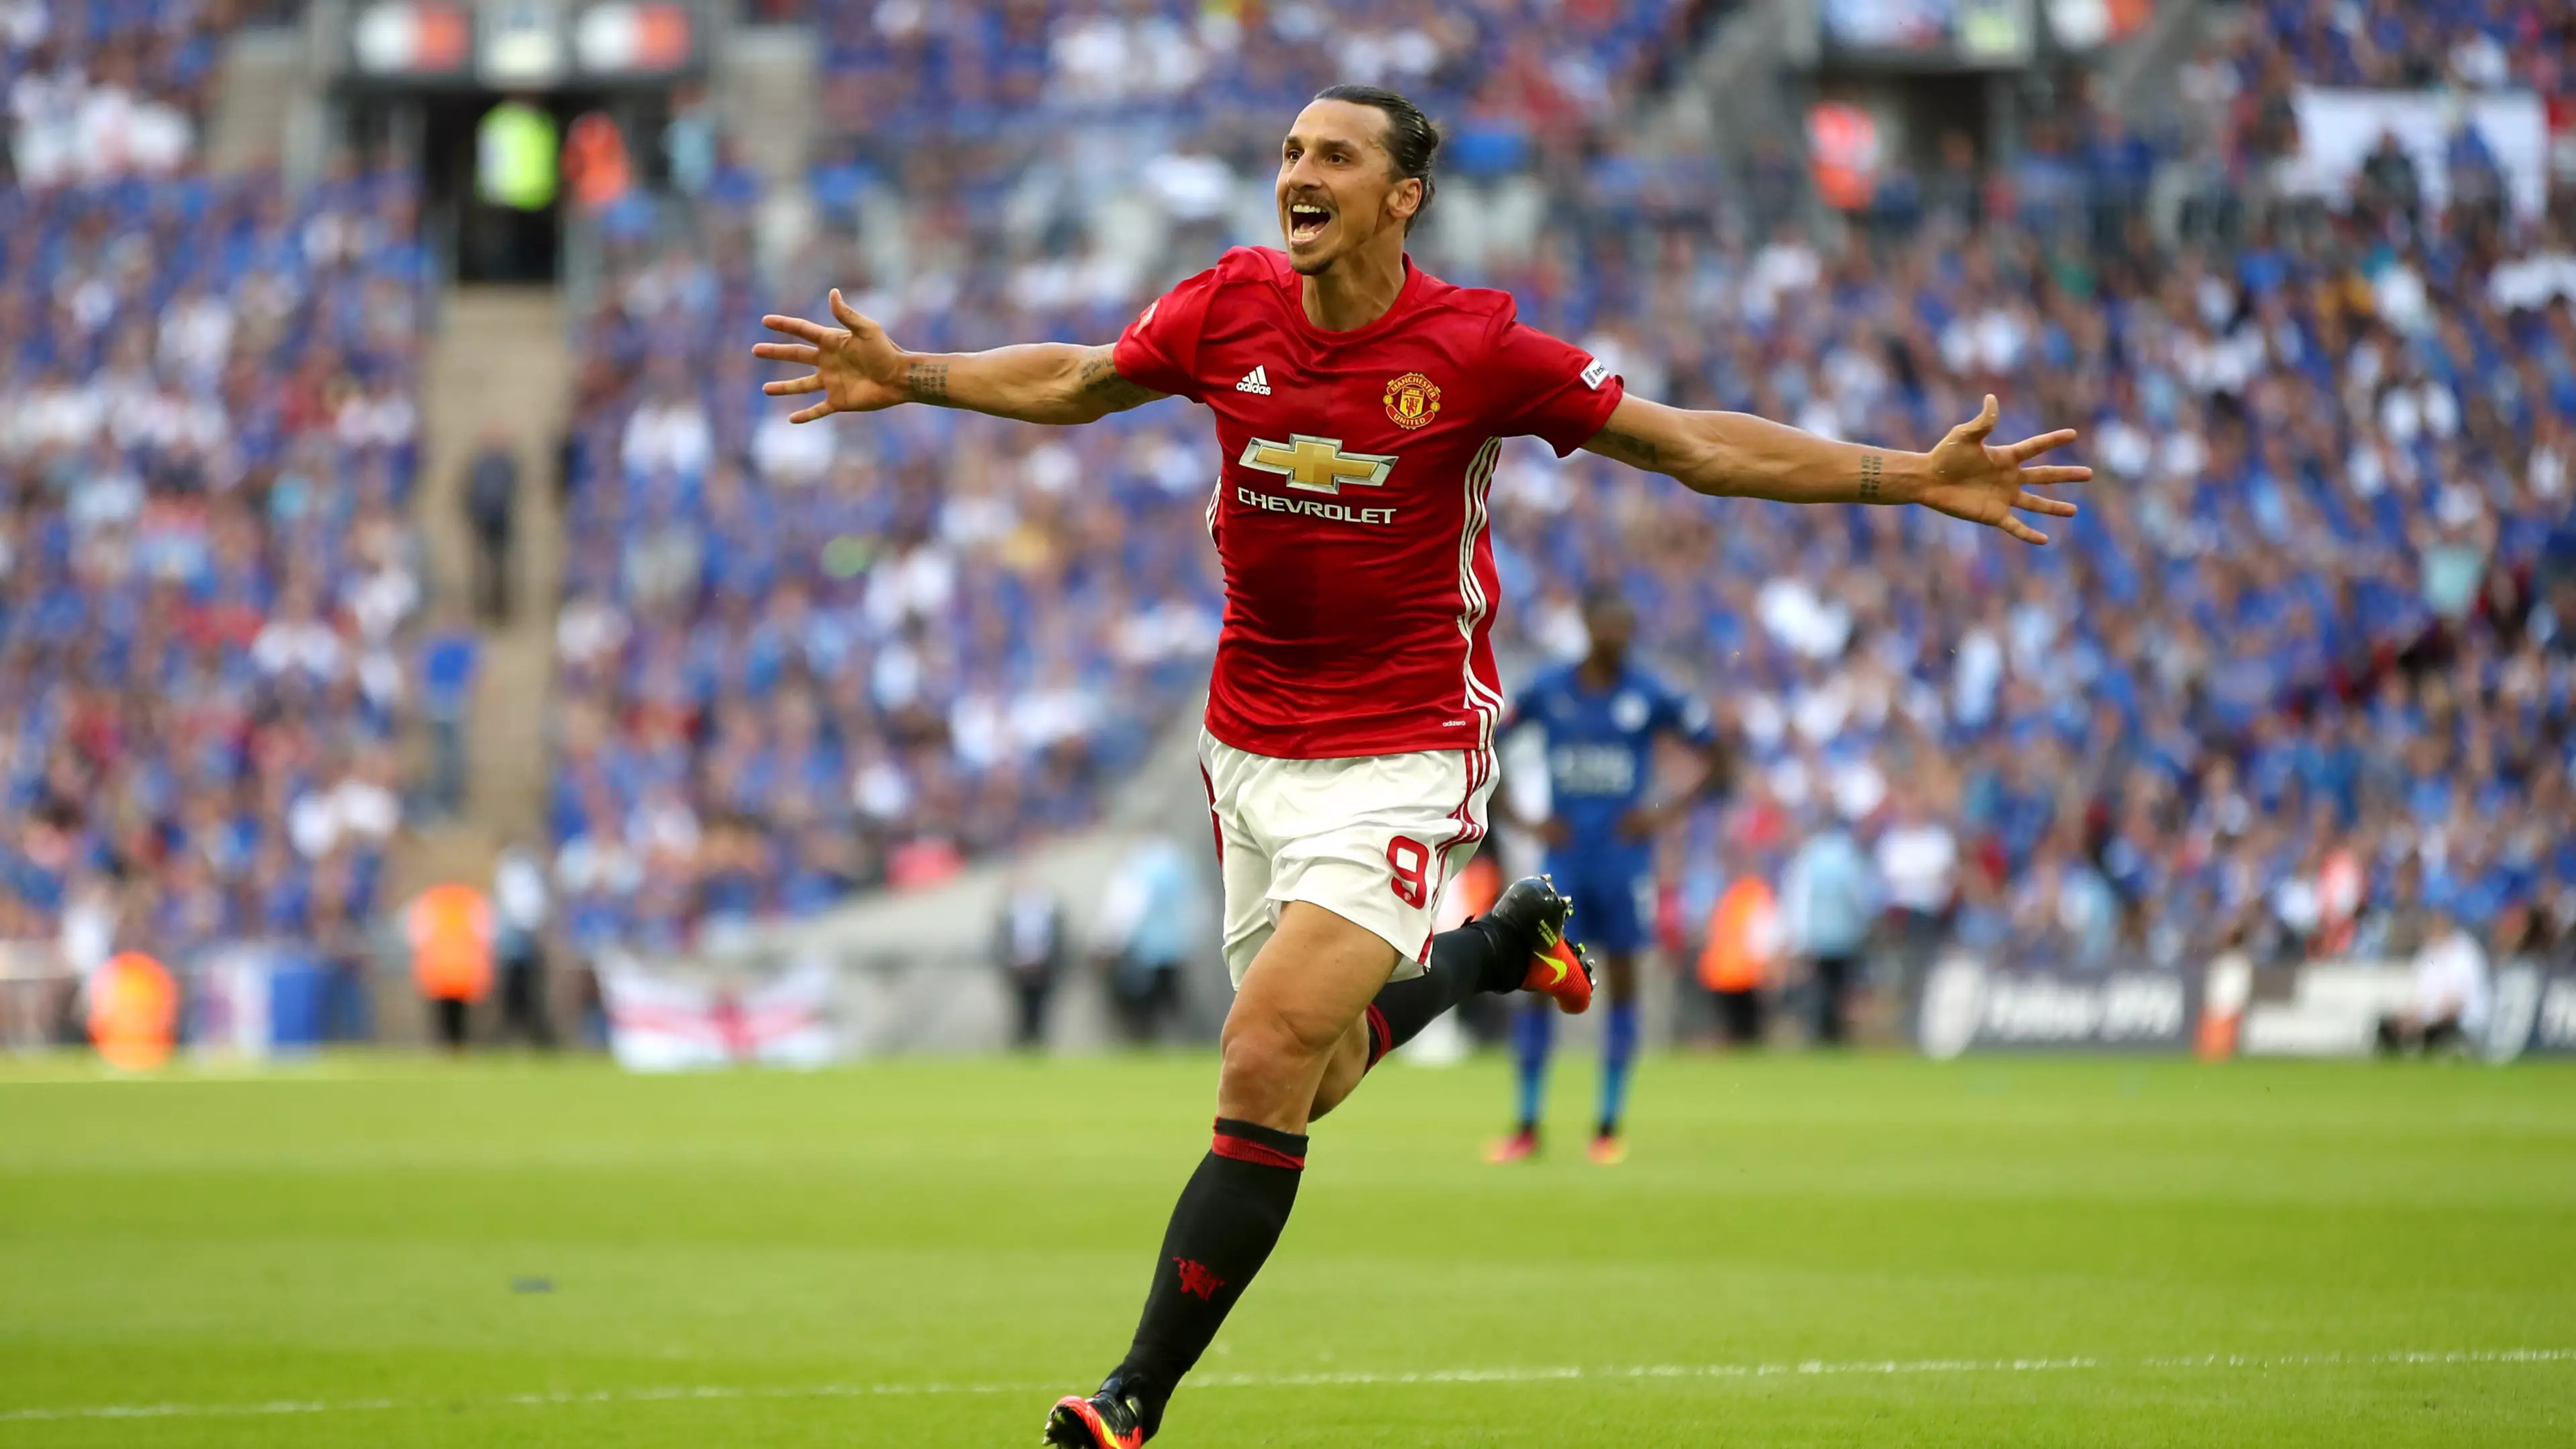 Manchester United Have Competition To Re-Sign Zlatan Ibrahimovic